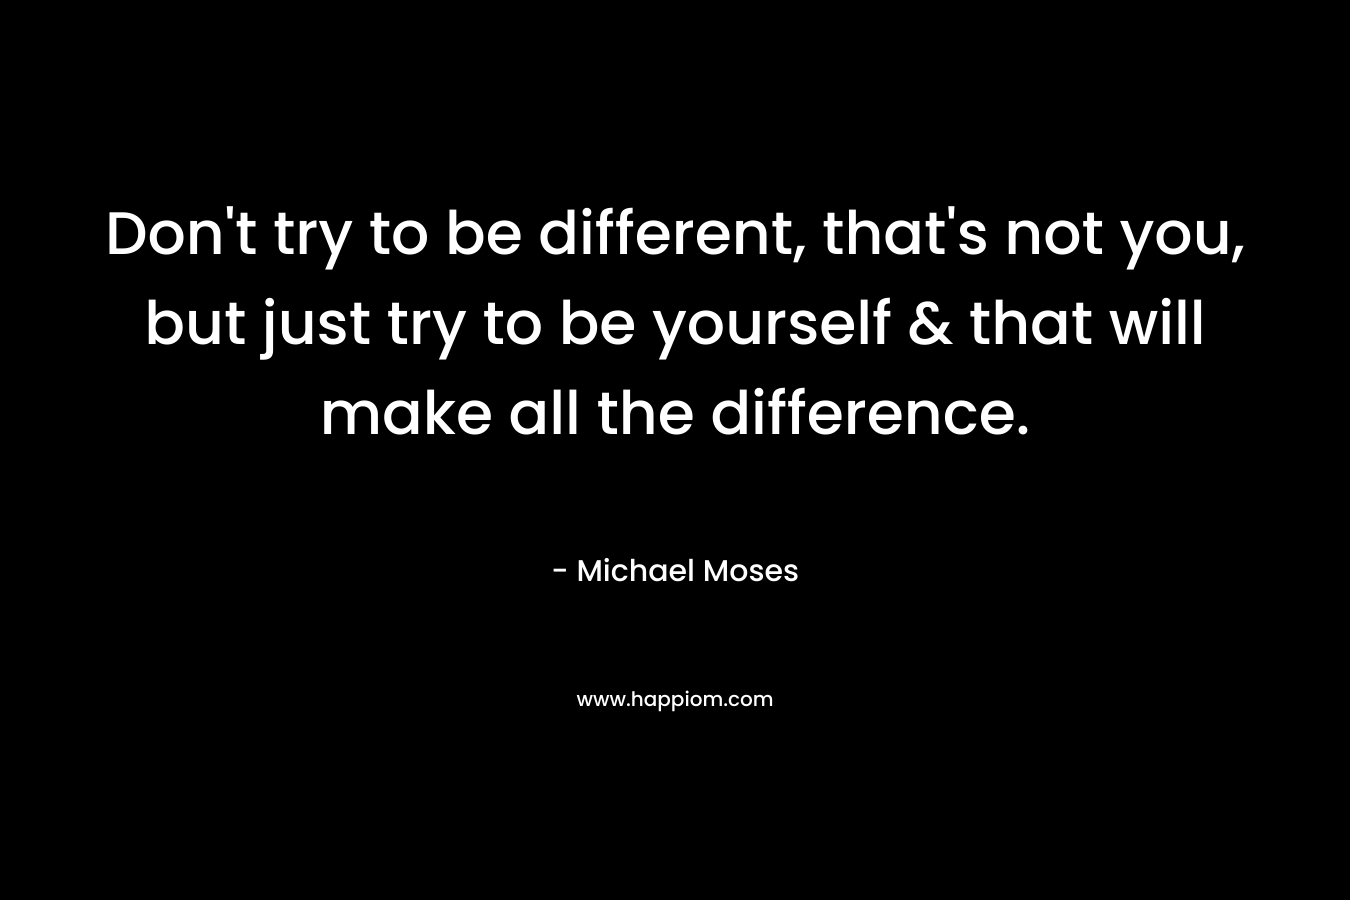 Don't try to be different, that's not you, but just try to be yourself & that will make all the difference.